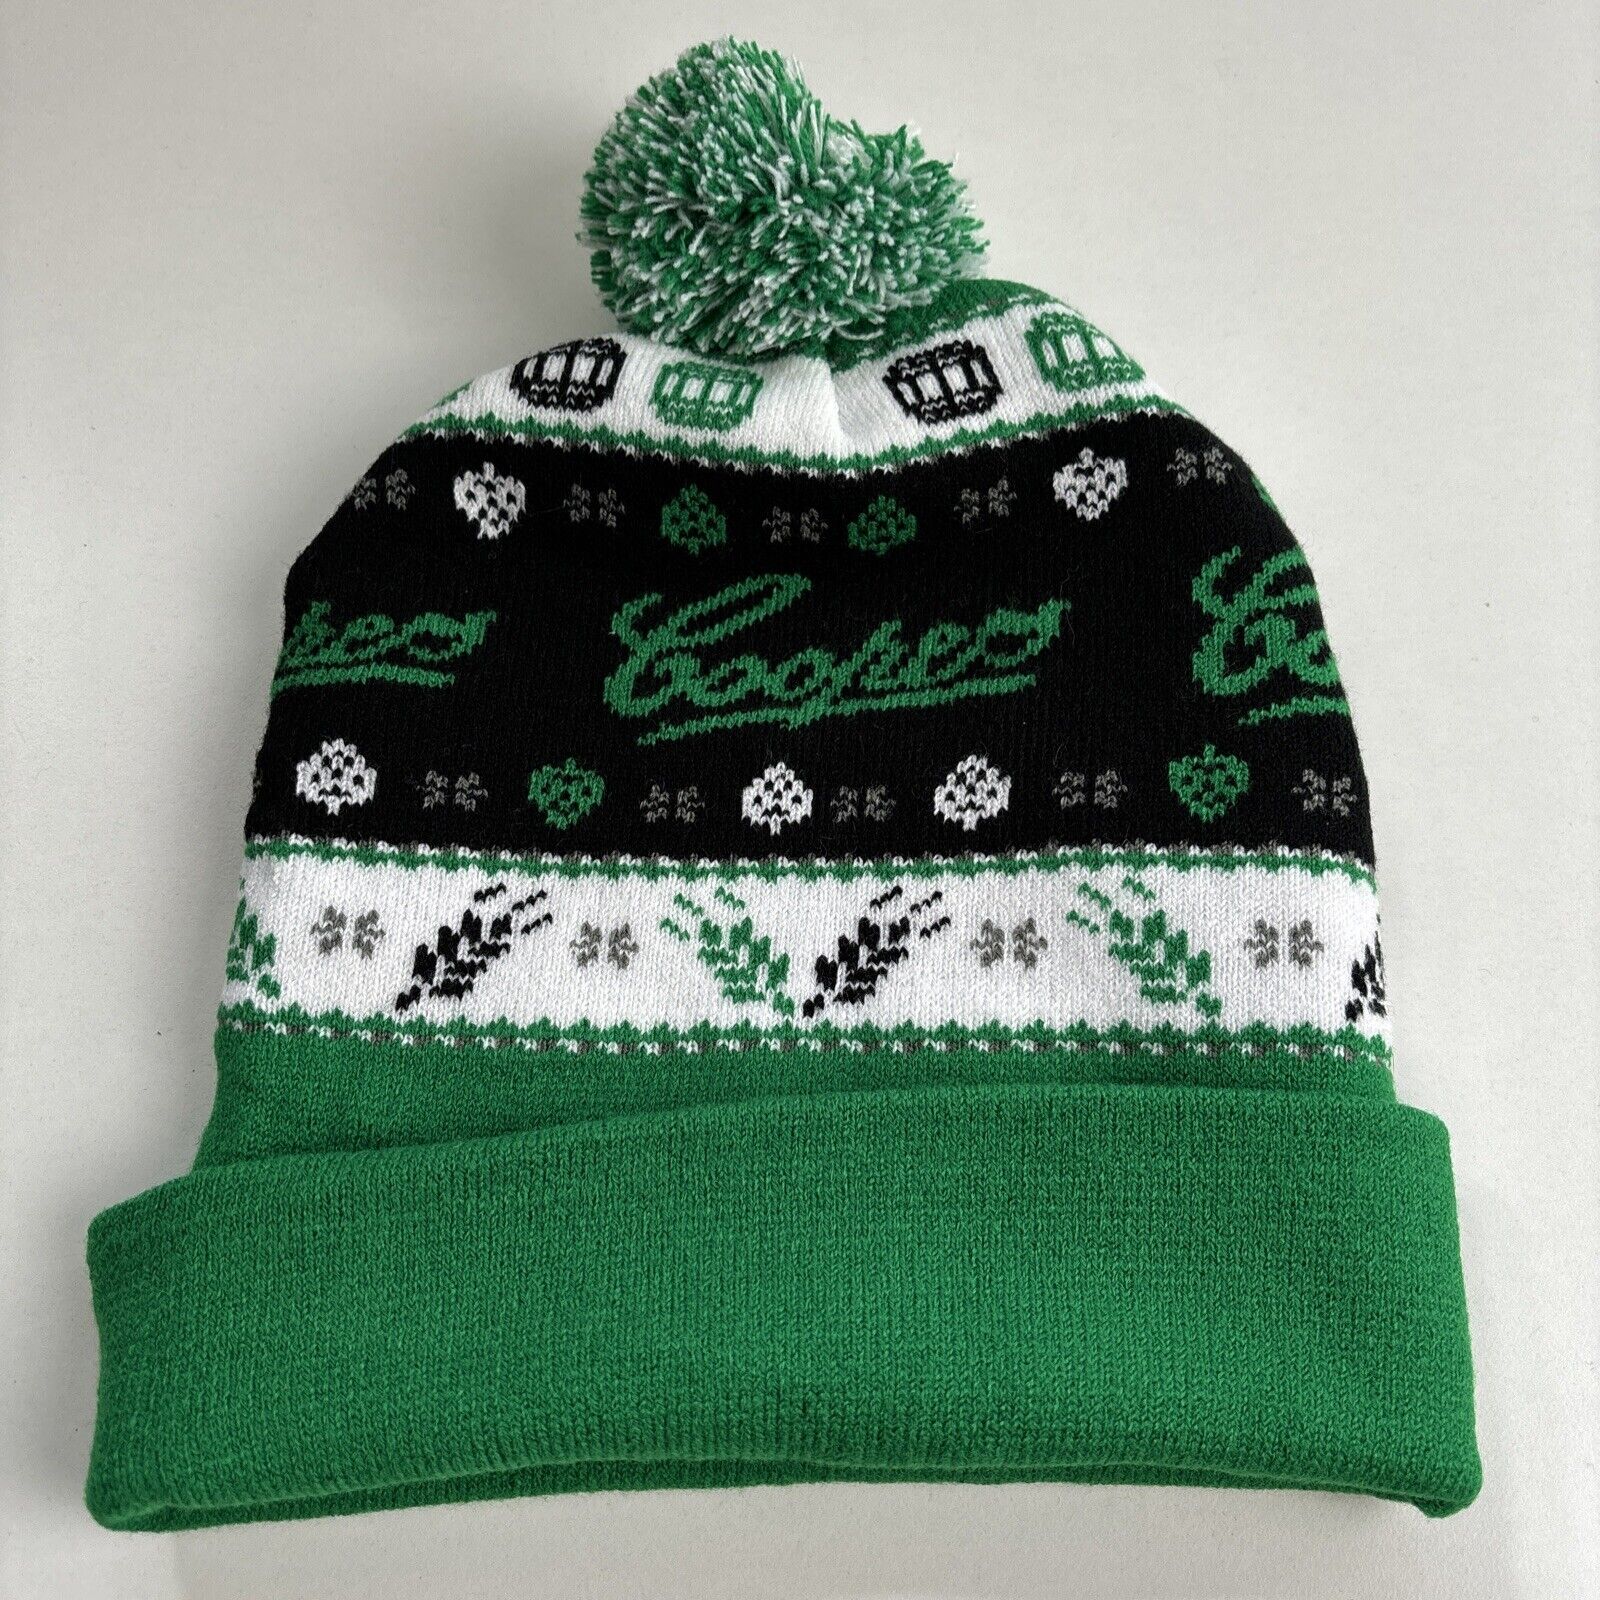 Coopers Brewery Beanie Ugly Christmas Pale Ale Beer Bright Green Black Merch Pom